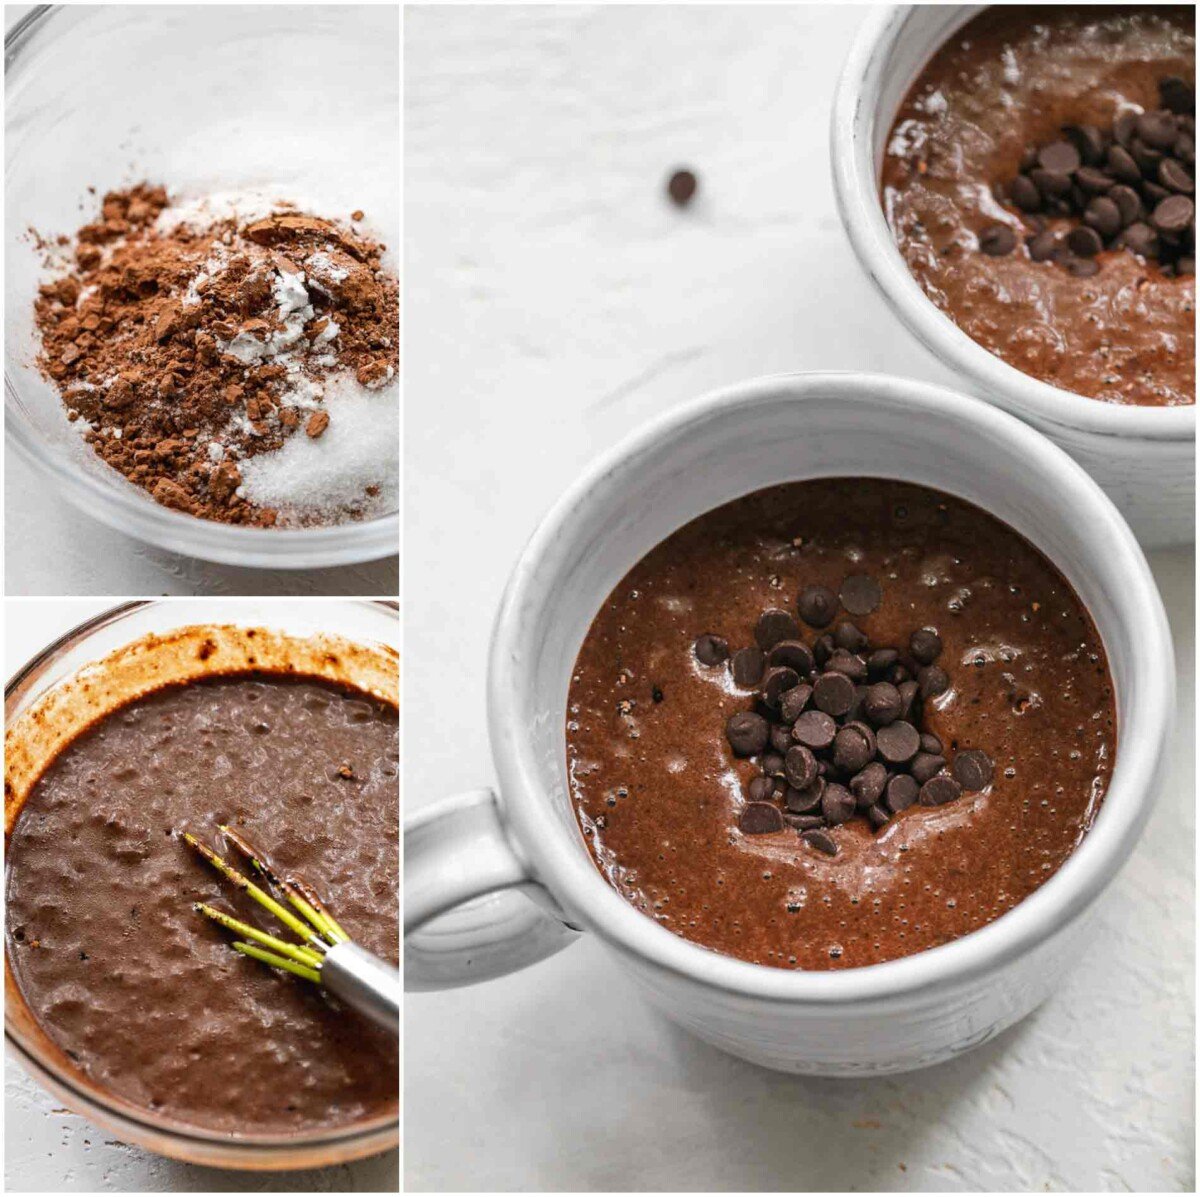 For all the coffee and chocolate lovers out there, this espresso chocolate mug cake is right up your alley! It is full of coffee and chocolate flavor!